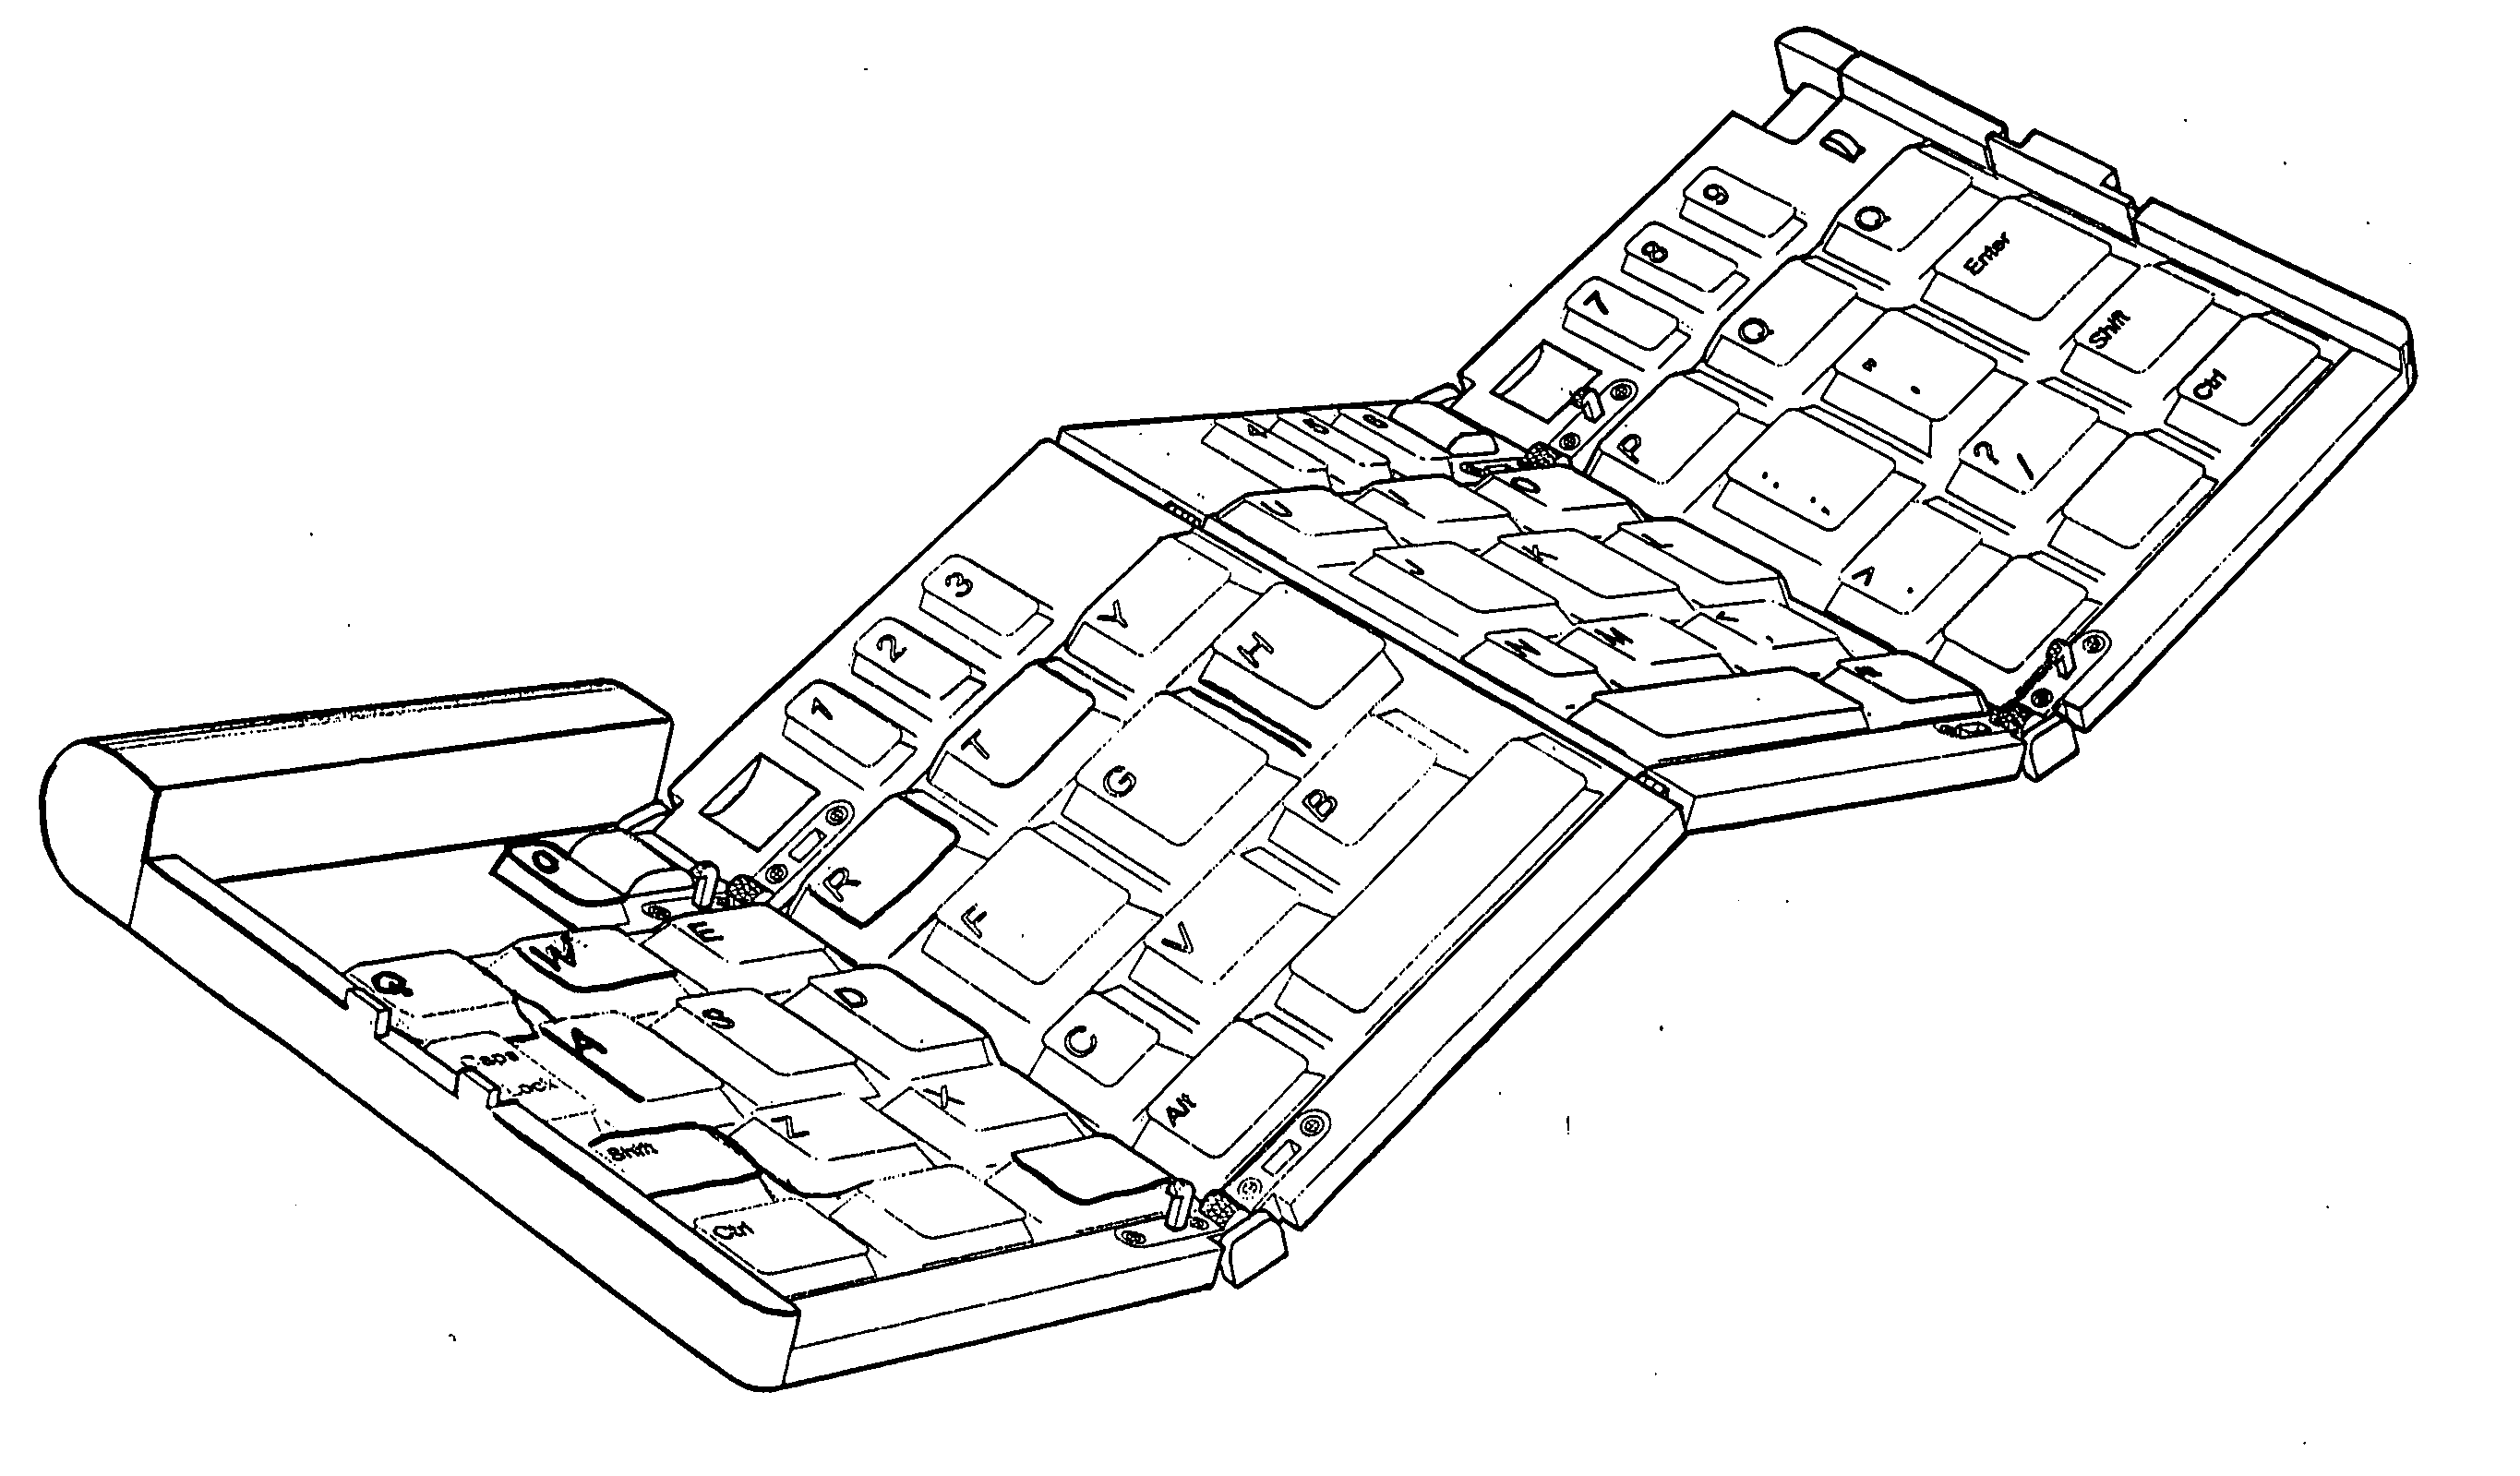 Keyboard and stand for portable computing and communication devices